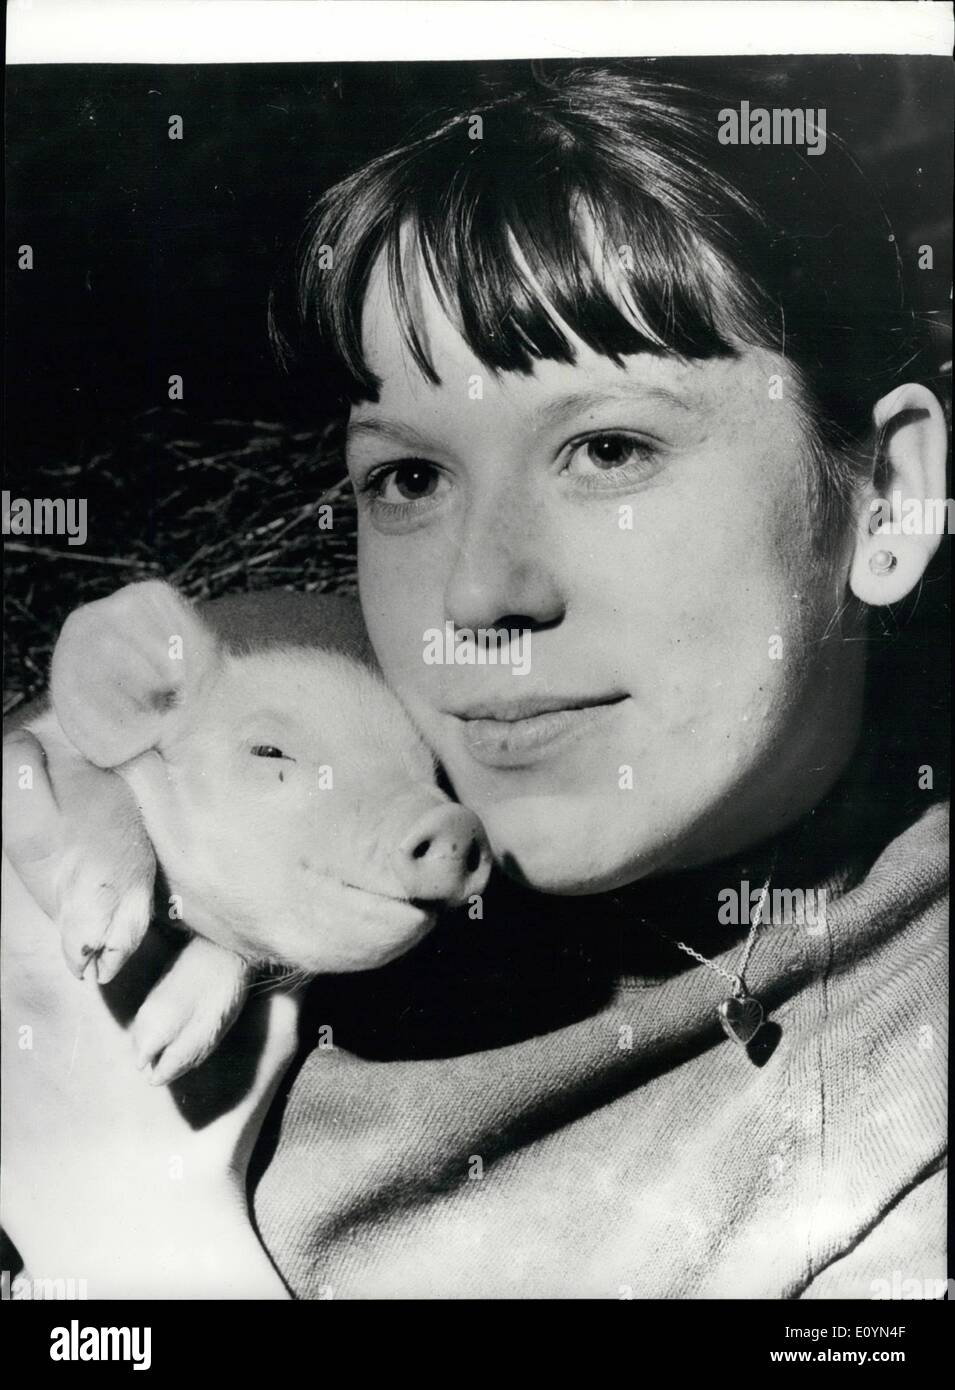 Nov. 11, 1970 - Student Nurse deals with her first emergency give kiss to life to four pigs: Pretty 19 year old student nurse, Hazel Cruddace, dealt with her first emergency when she gave the kiss of life to four pigs. Her emergency ward was the pigsty in her own back yard. And the drama started when her mother's sow, Susie, gave birth to four piglets which were not breathing. For almost half an hour Hazel, a student nurse for three months, administered the kiss of life to the piglets and three recovered Stock Photo